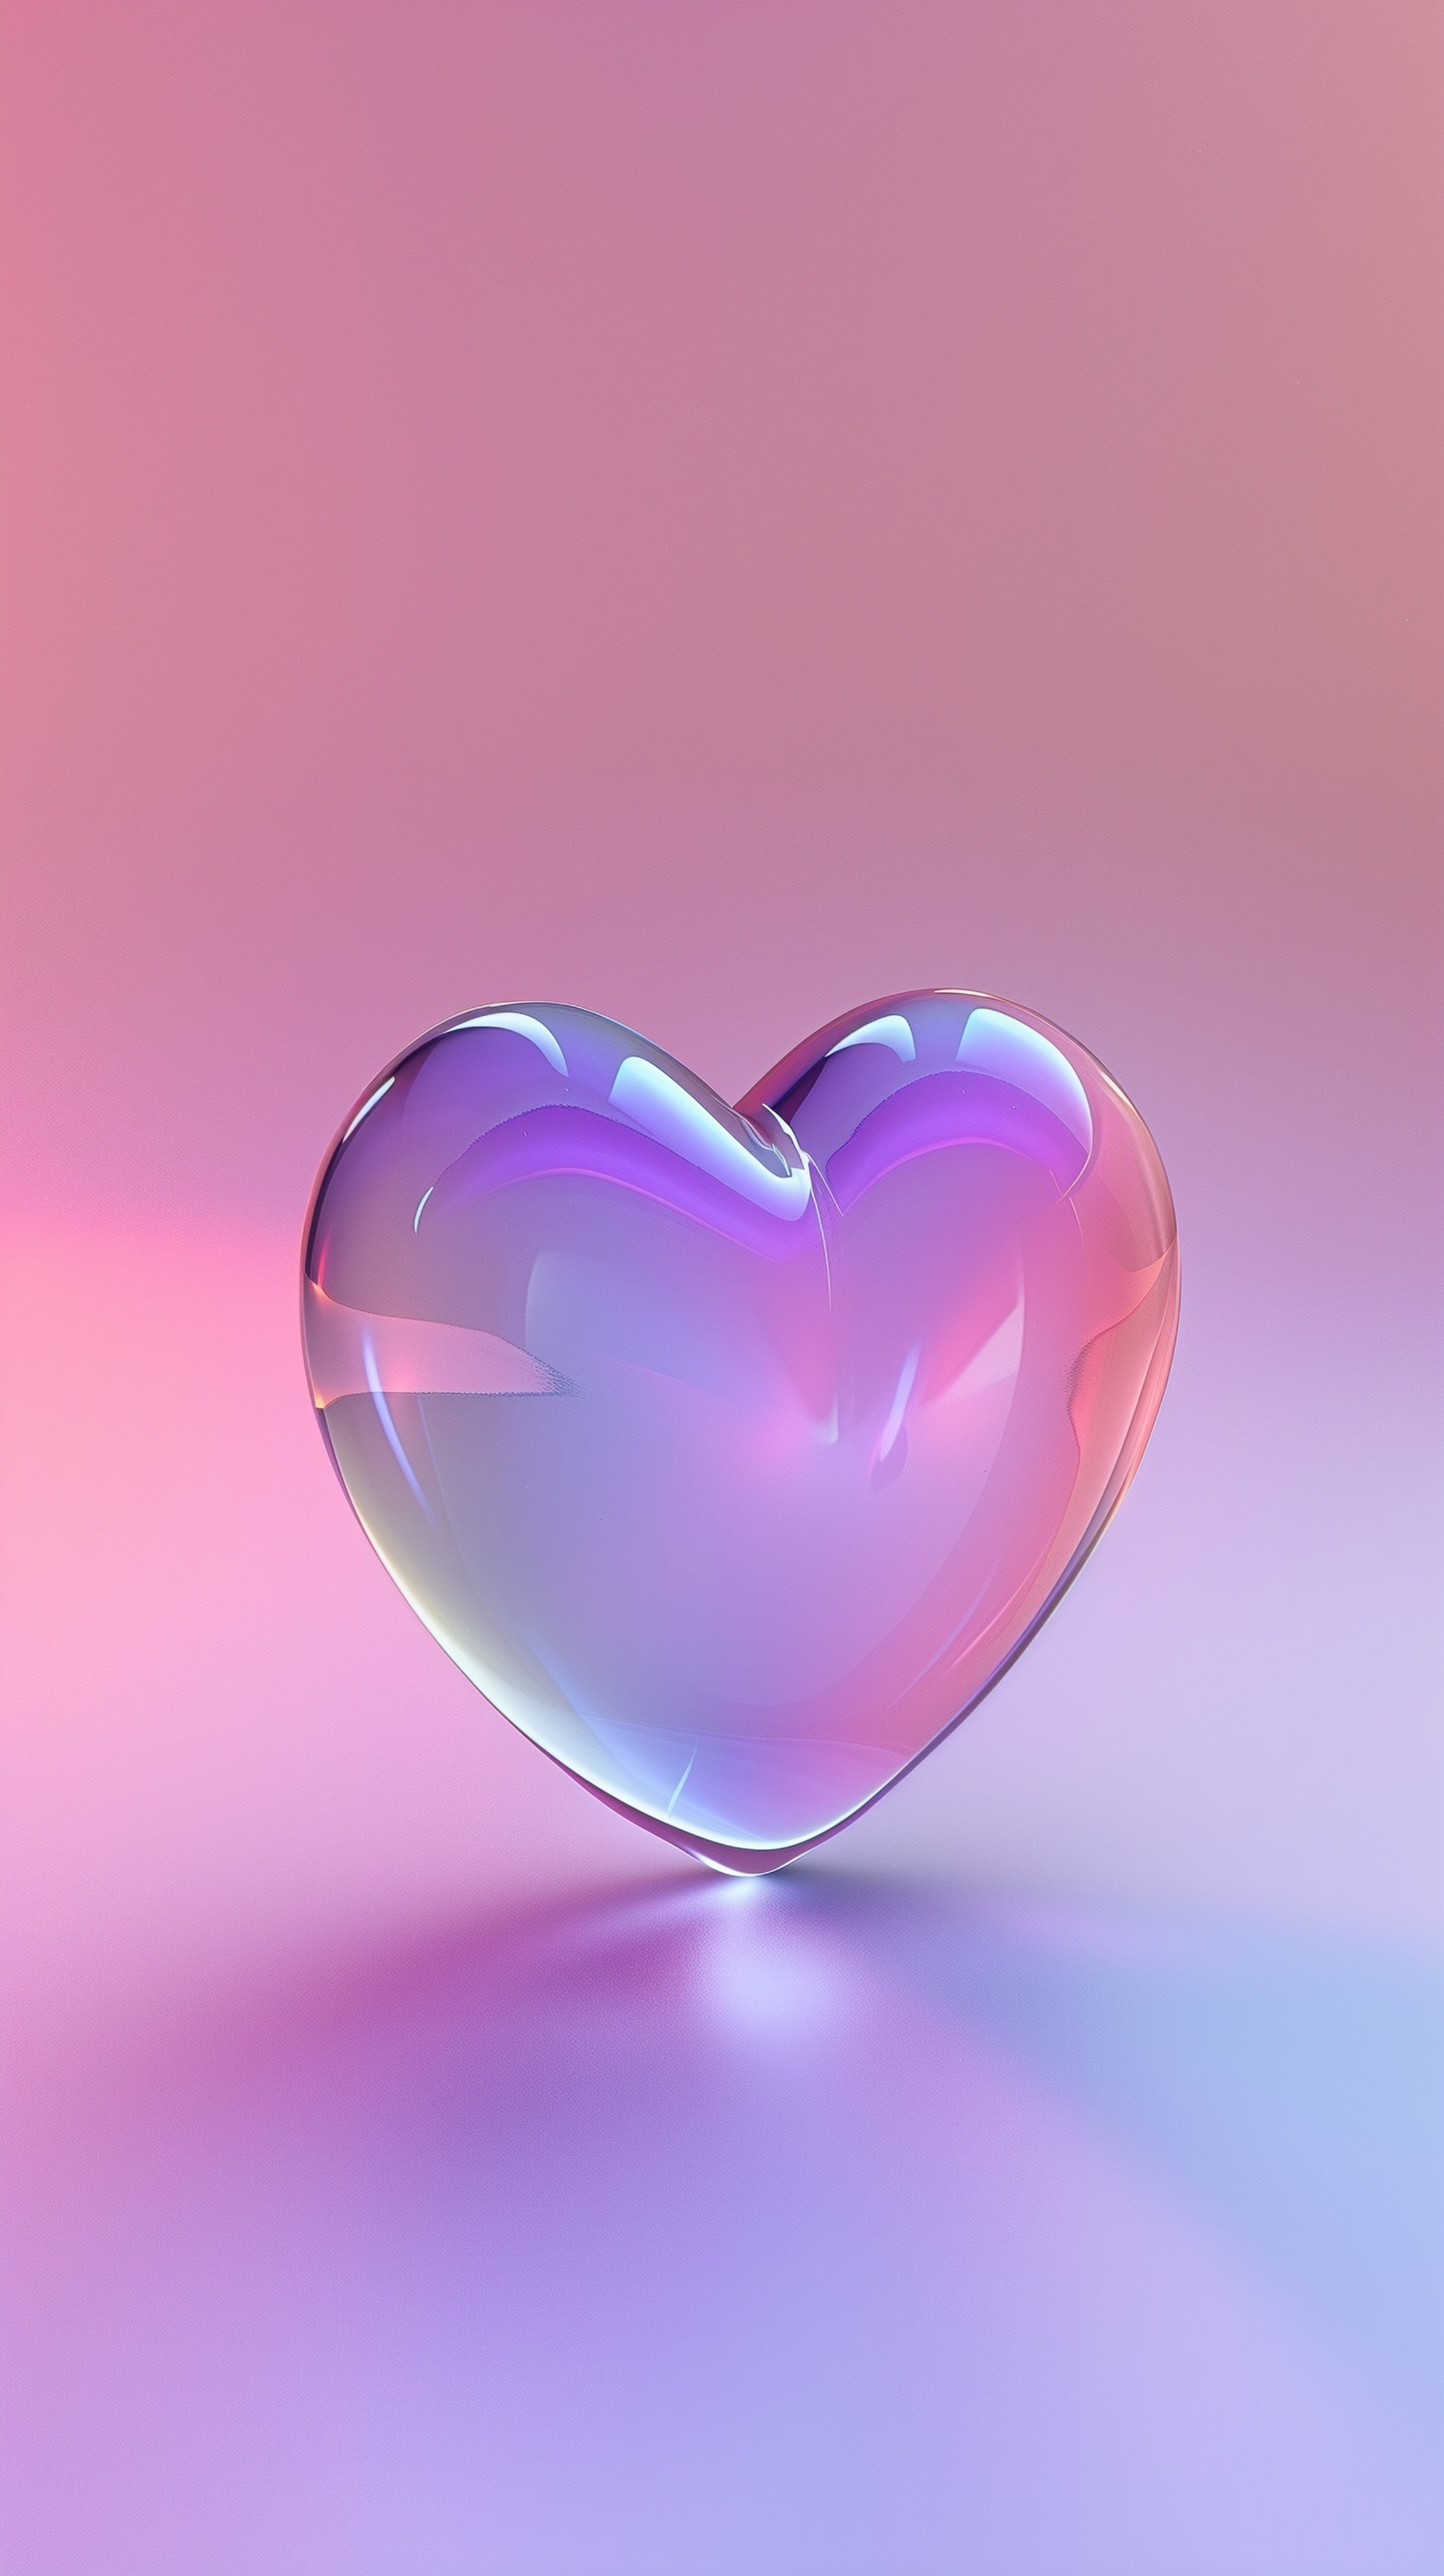 Colorful Glass Heart on Pink Background Tapet[47d8940110524ca1b371]